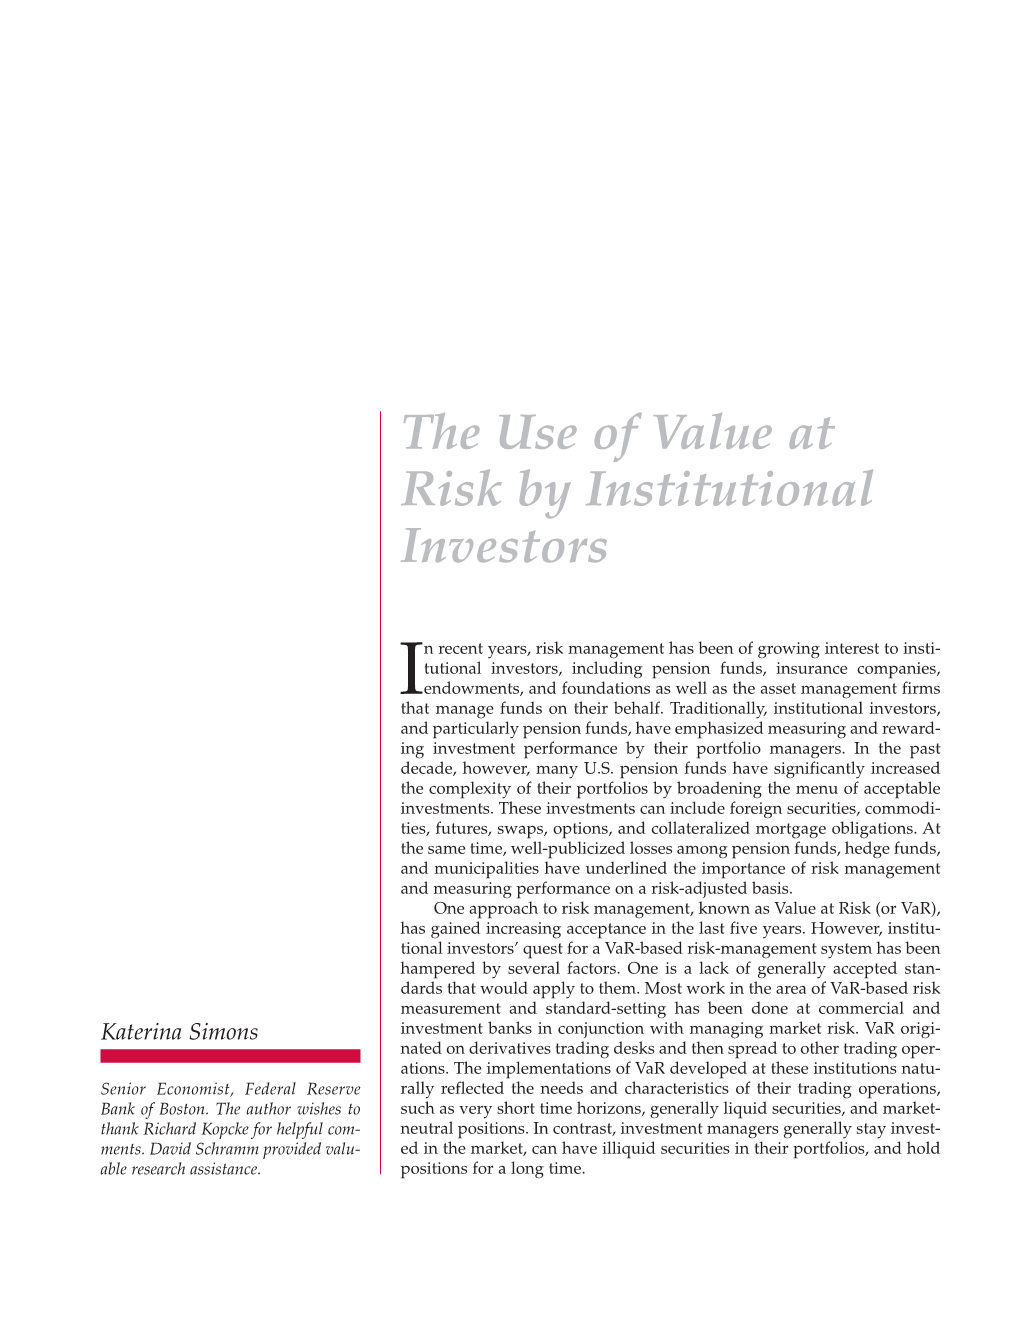 The Use of Value at Risk by Institutional Investors